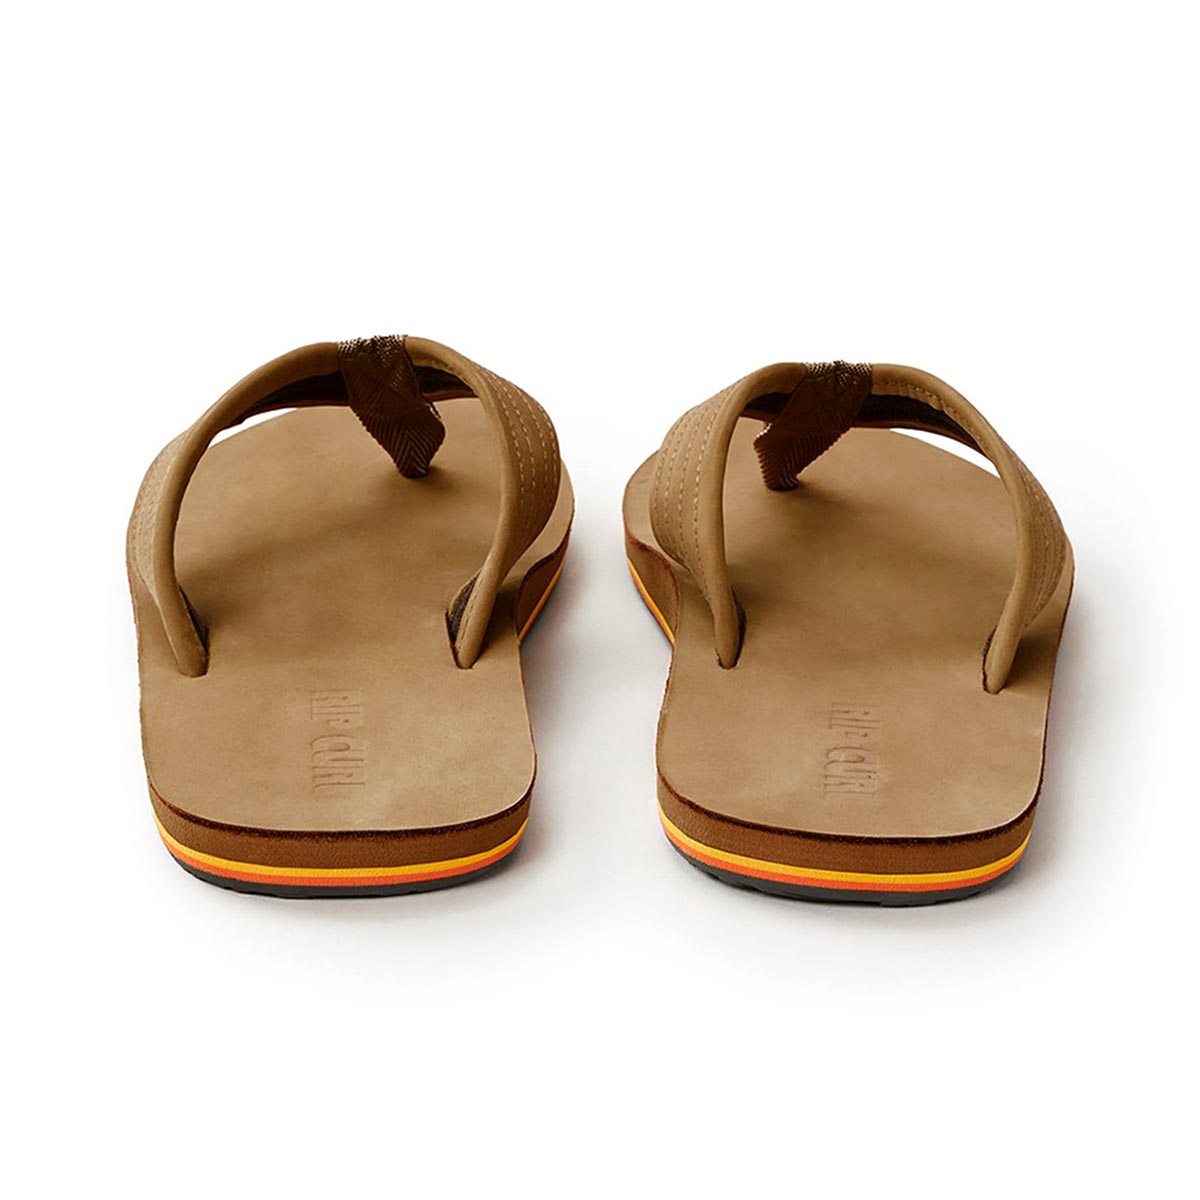 RIP CURL - REVIVAL LEATHER OPEN TOE THONGS